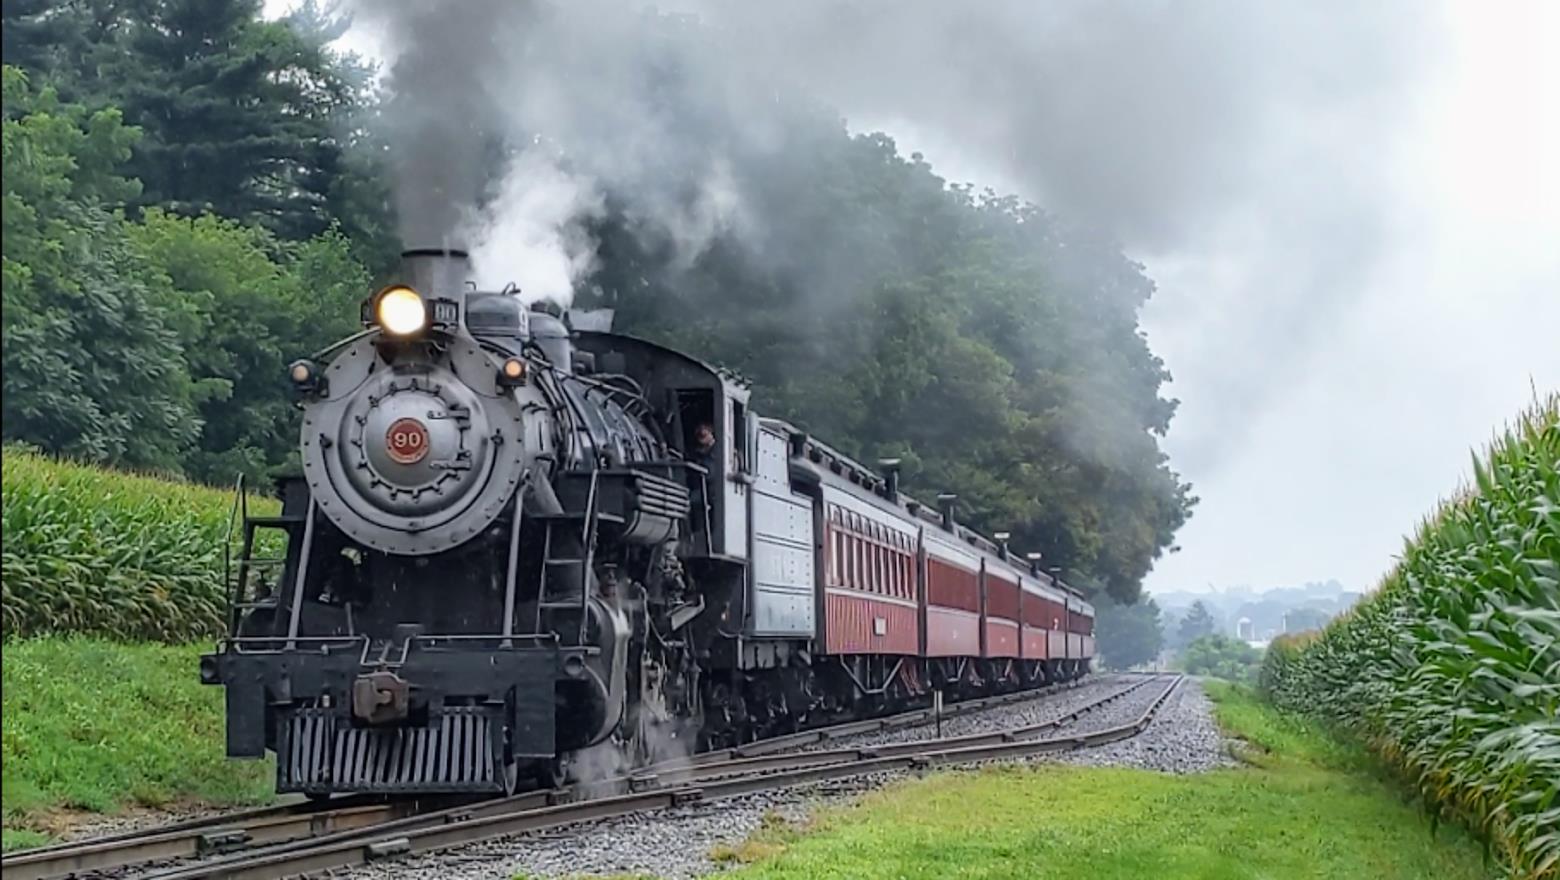 SRR 90 is a class Steam 2-10-0 and  is pictured in Strasburg, Pennsylvania, United States.  This was taken along the N/A on the Strasburg Rail Road. Photo Copyright: Mary T uploaded to Railroad Gallery on 11/11/2022. This photograph of SRR 90 was taken on Sunday, August 22, 2021. All Rights Reserved. 